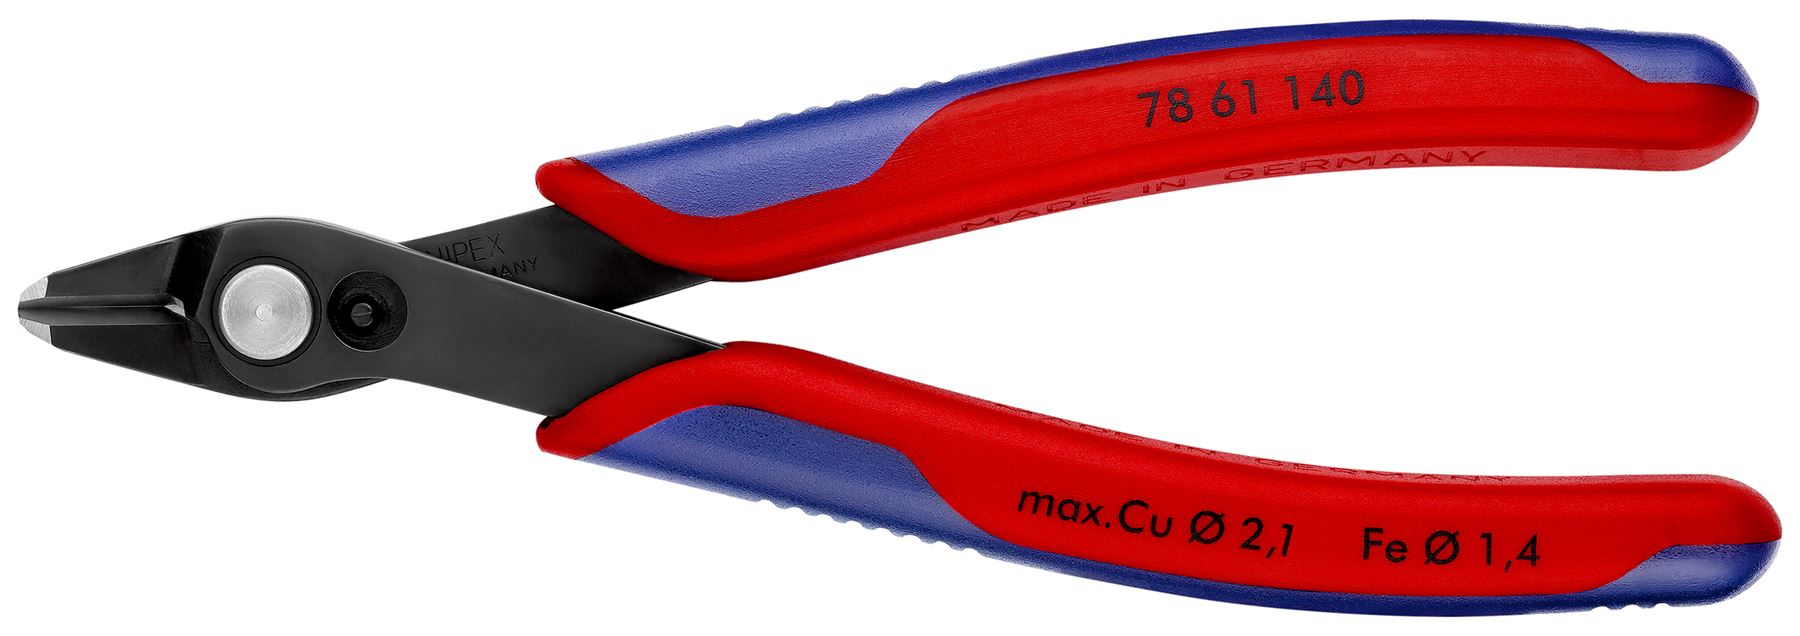 KNIPEX Electronics Super Knips XL Precision Cutting Pliers 140mm Multi Component Grips 78 61 140 SB